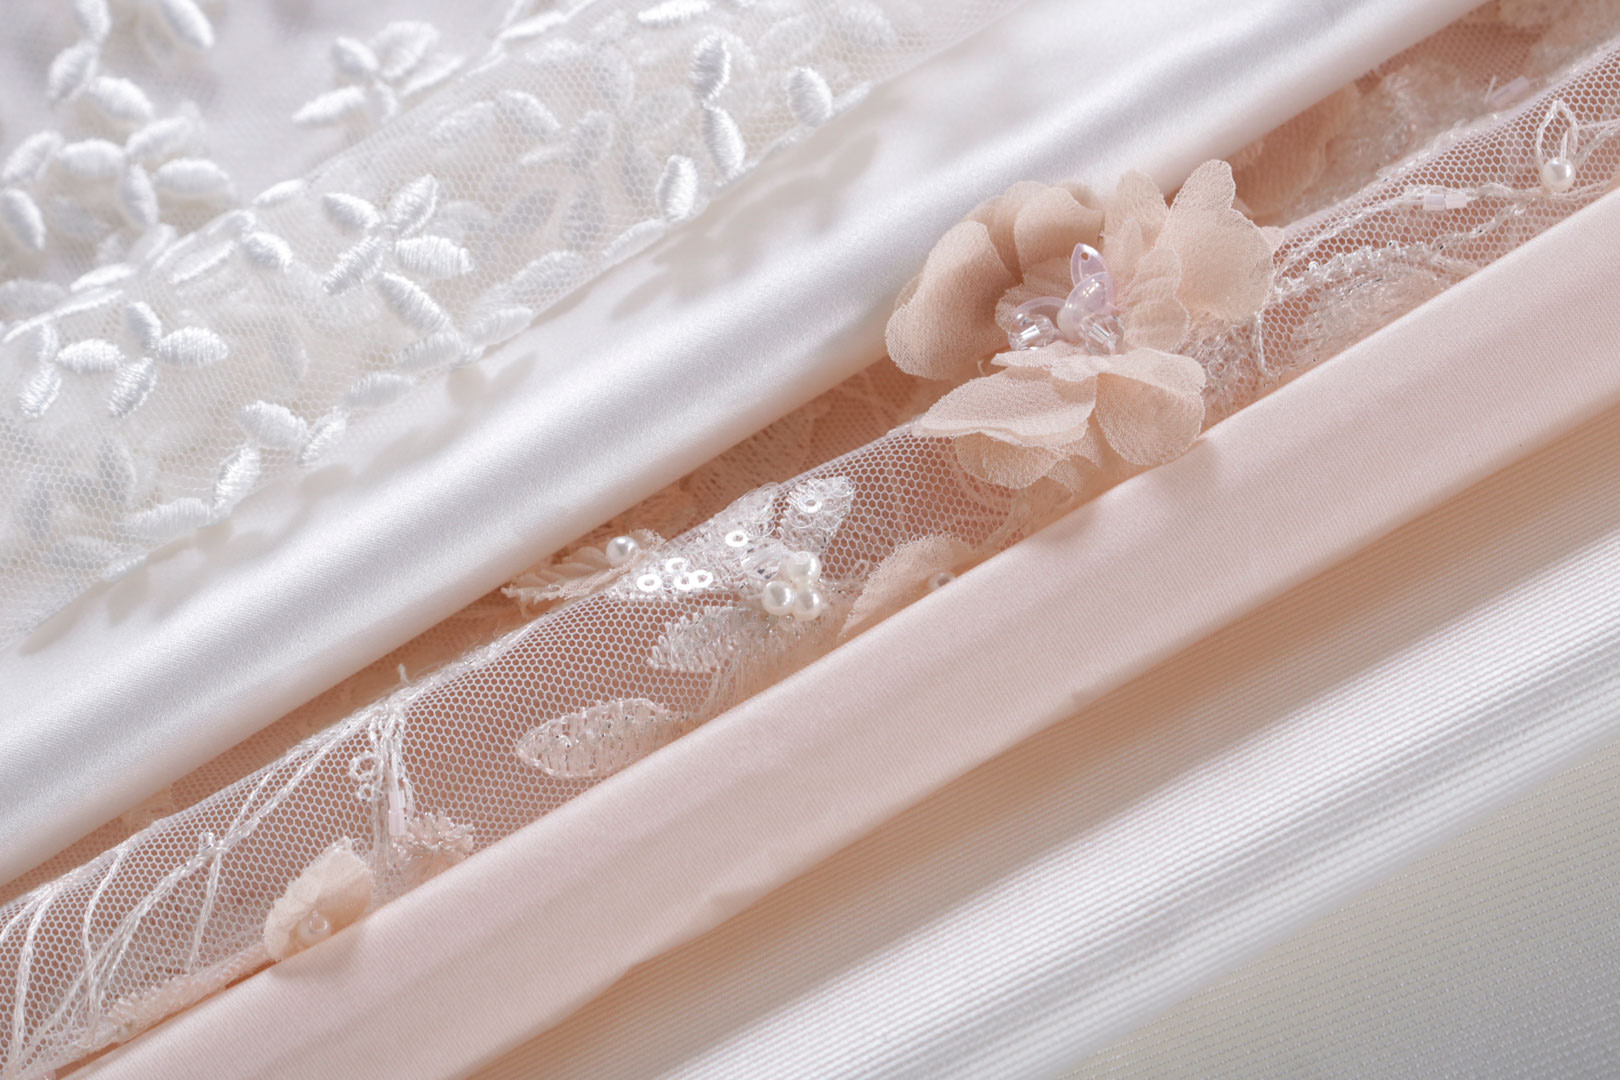 Diamonds and lace are the stars and flowers of the new Dentelle de